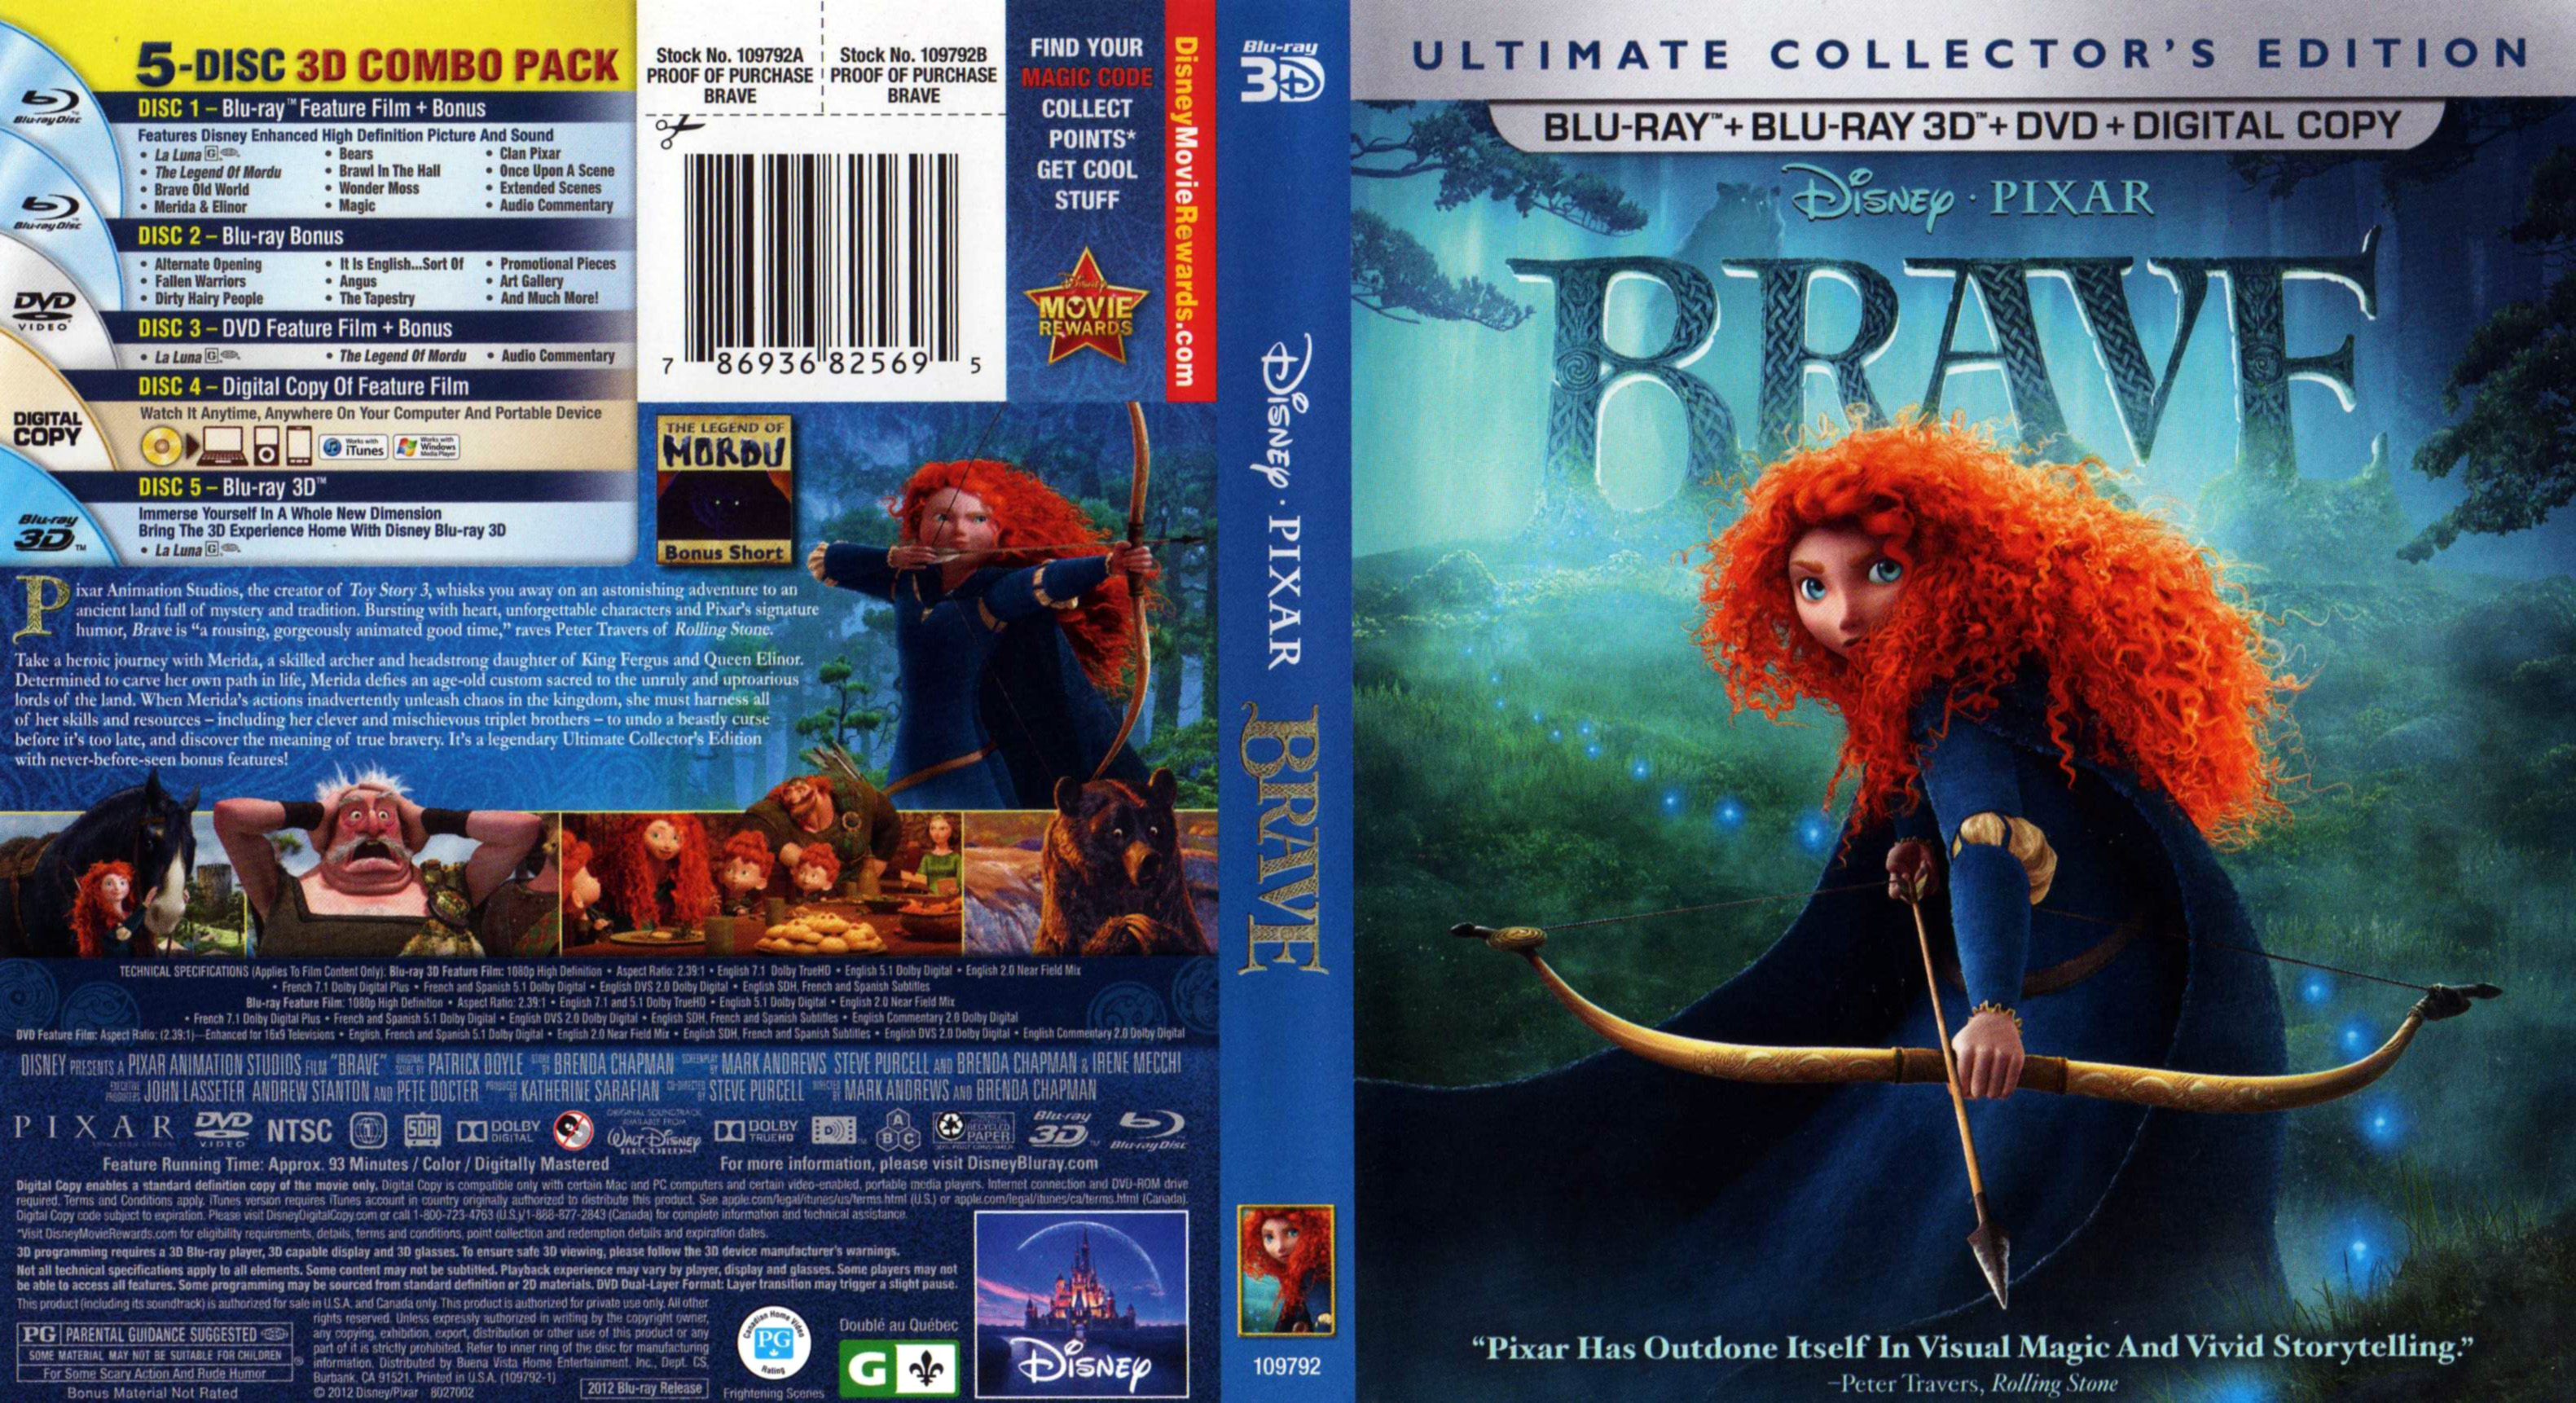 Jaquette DVD Brave - Rebelle (Canadienne) (BLU-RAY)